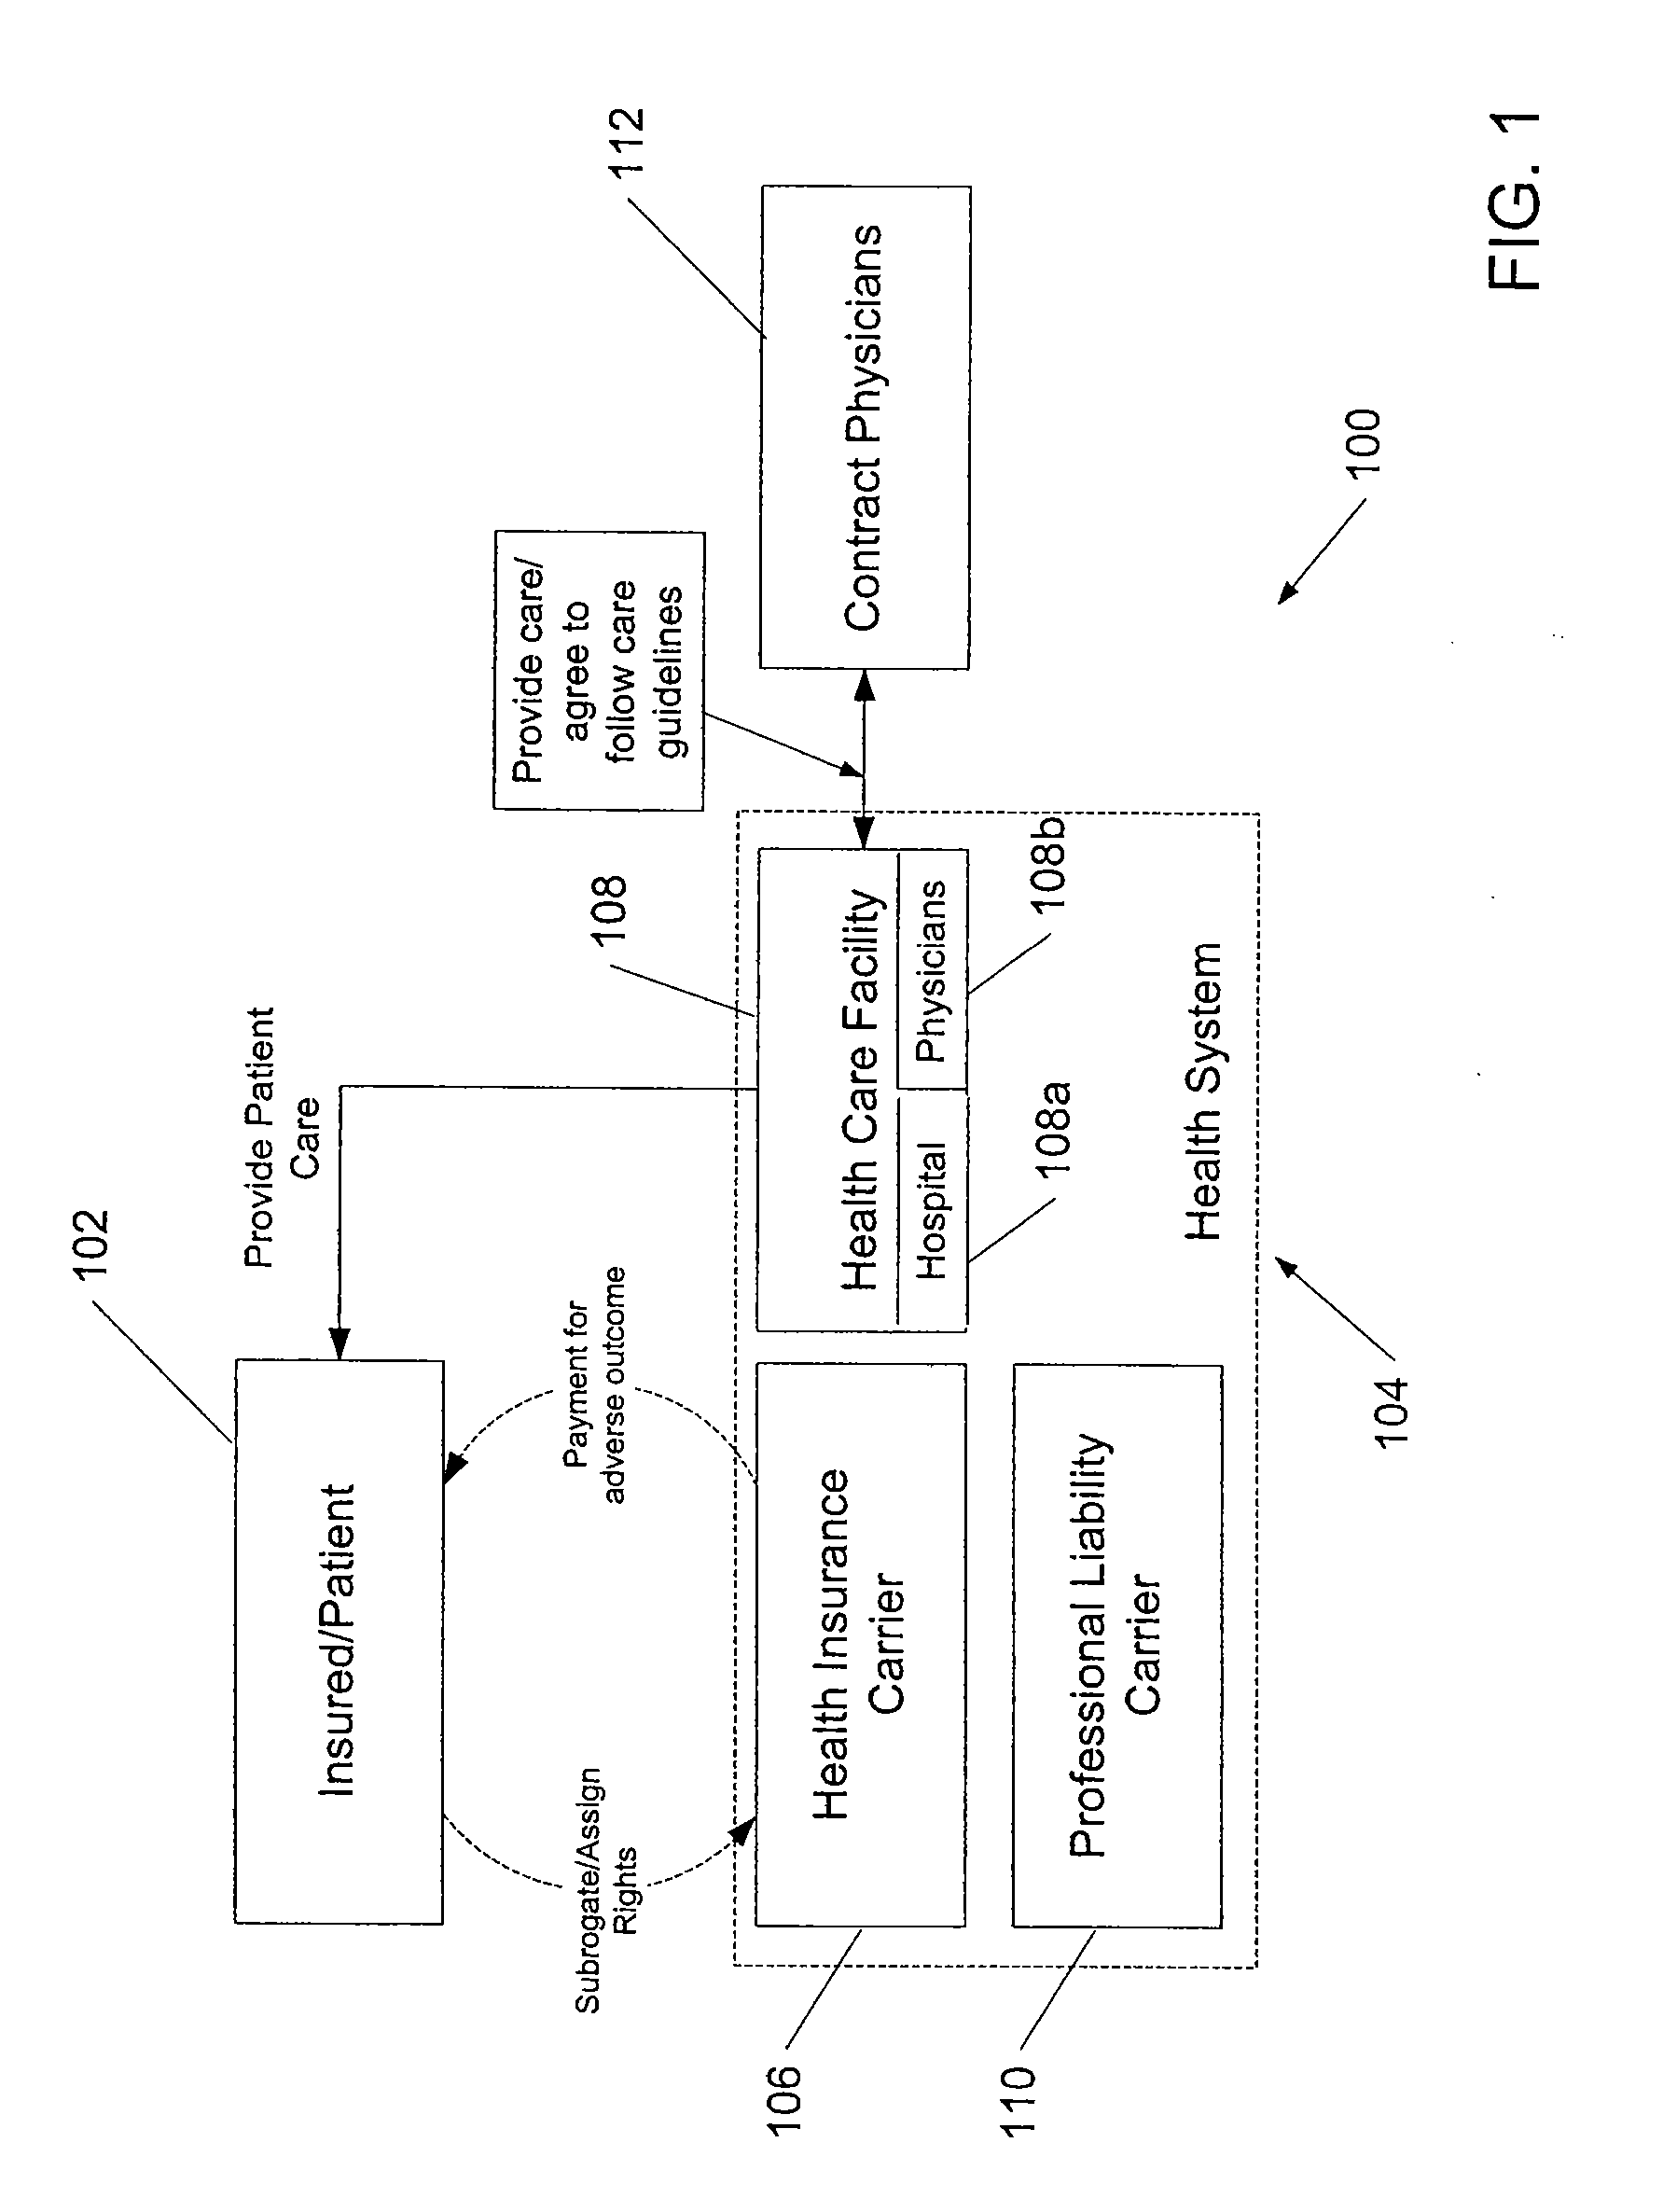 Method and system for reducing the incidence of defensive medicine